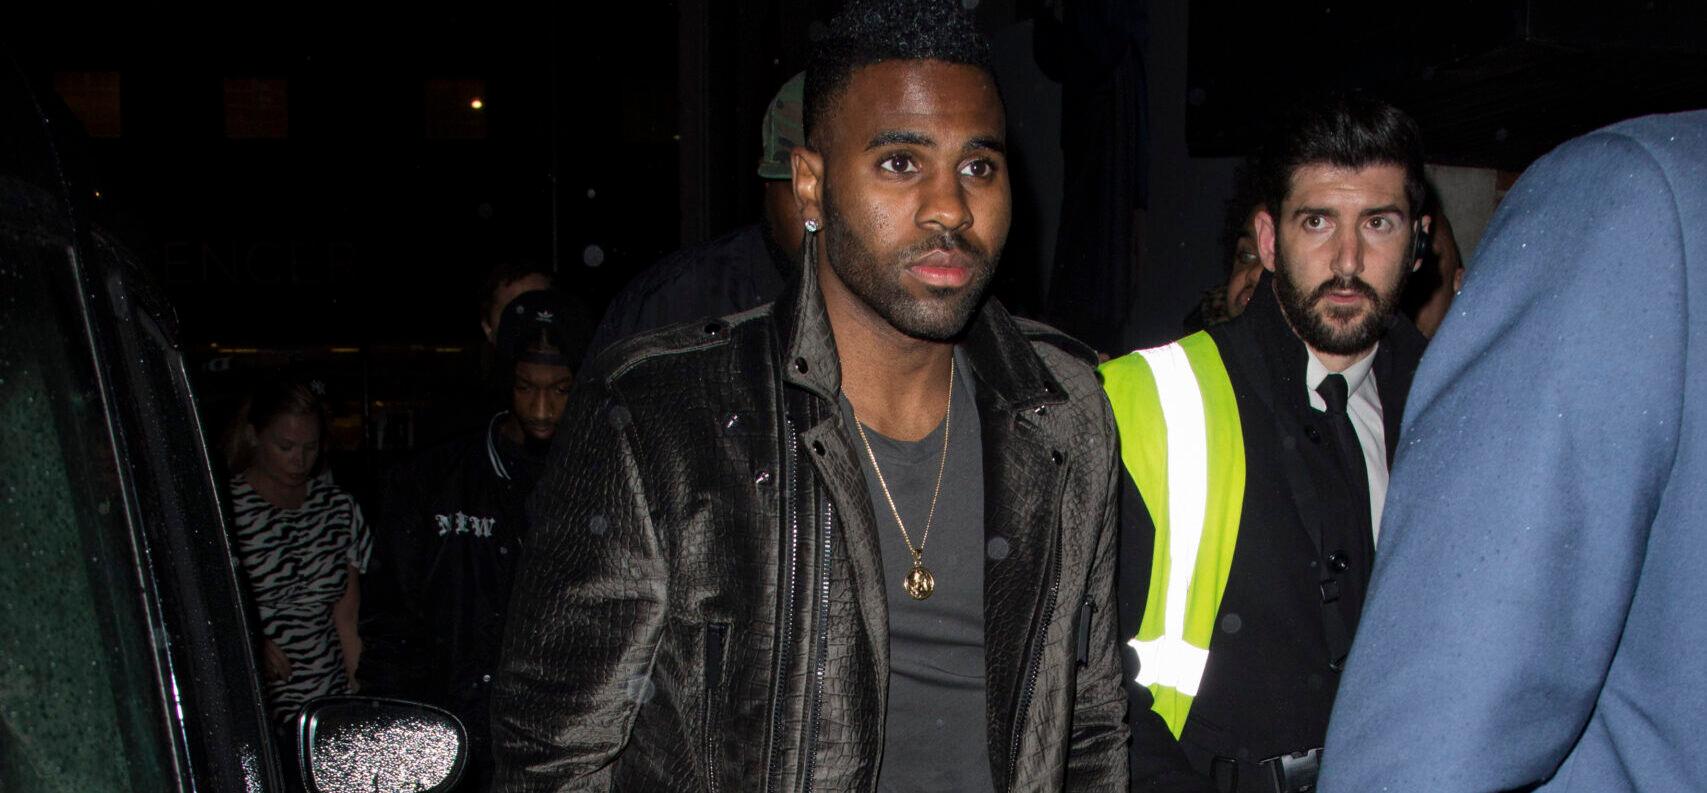 Jason Derulo Sued By Former Manager For Over $1 Million In Alleged Unpaid Commissions